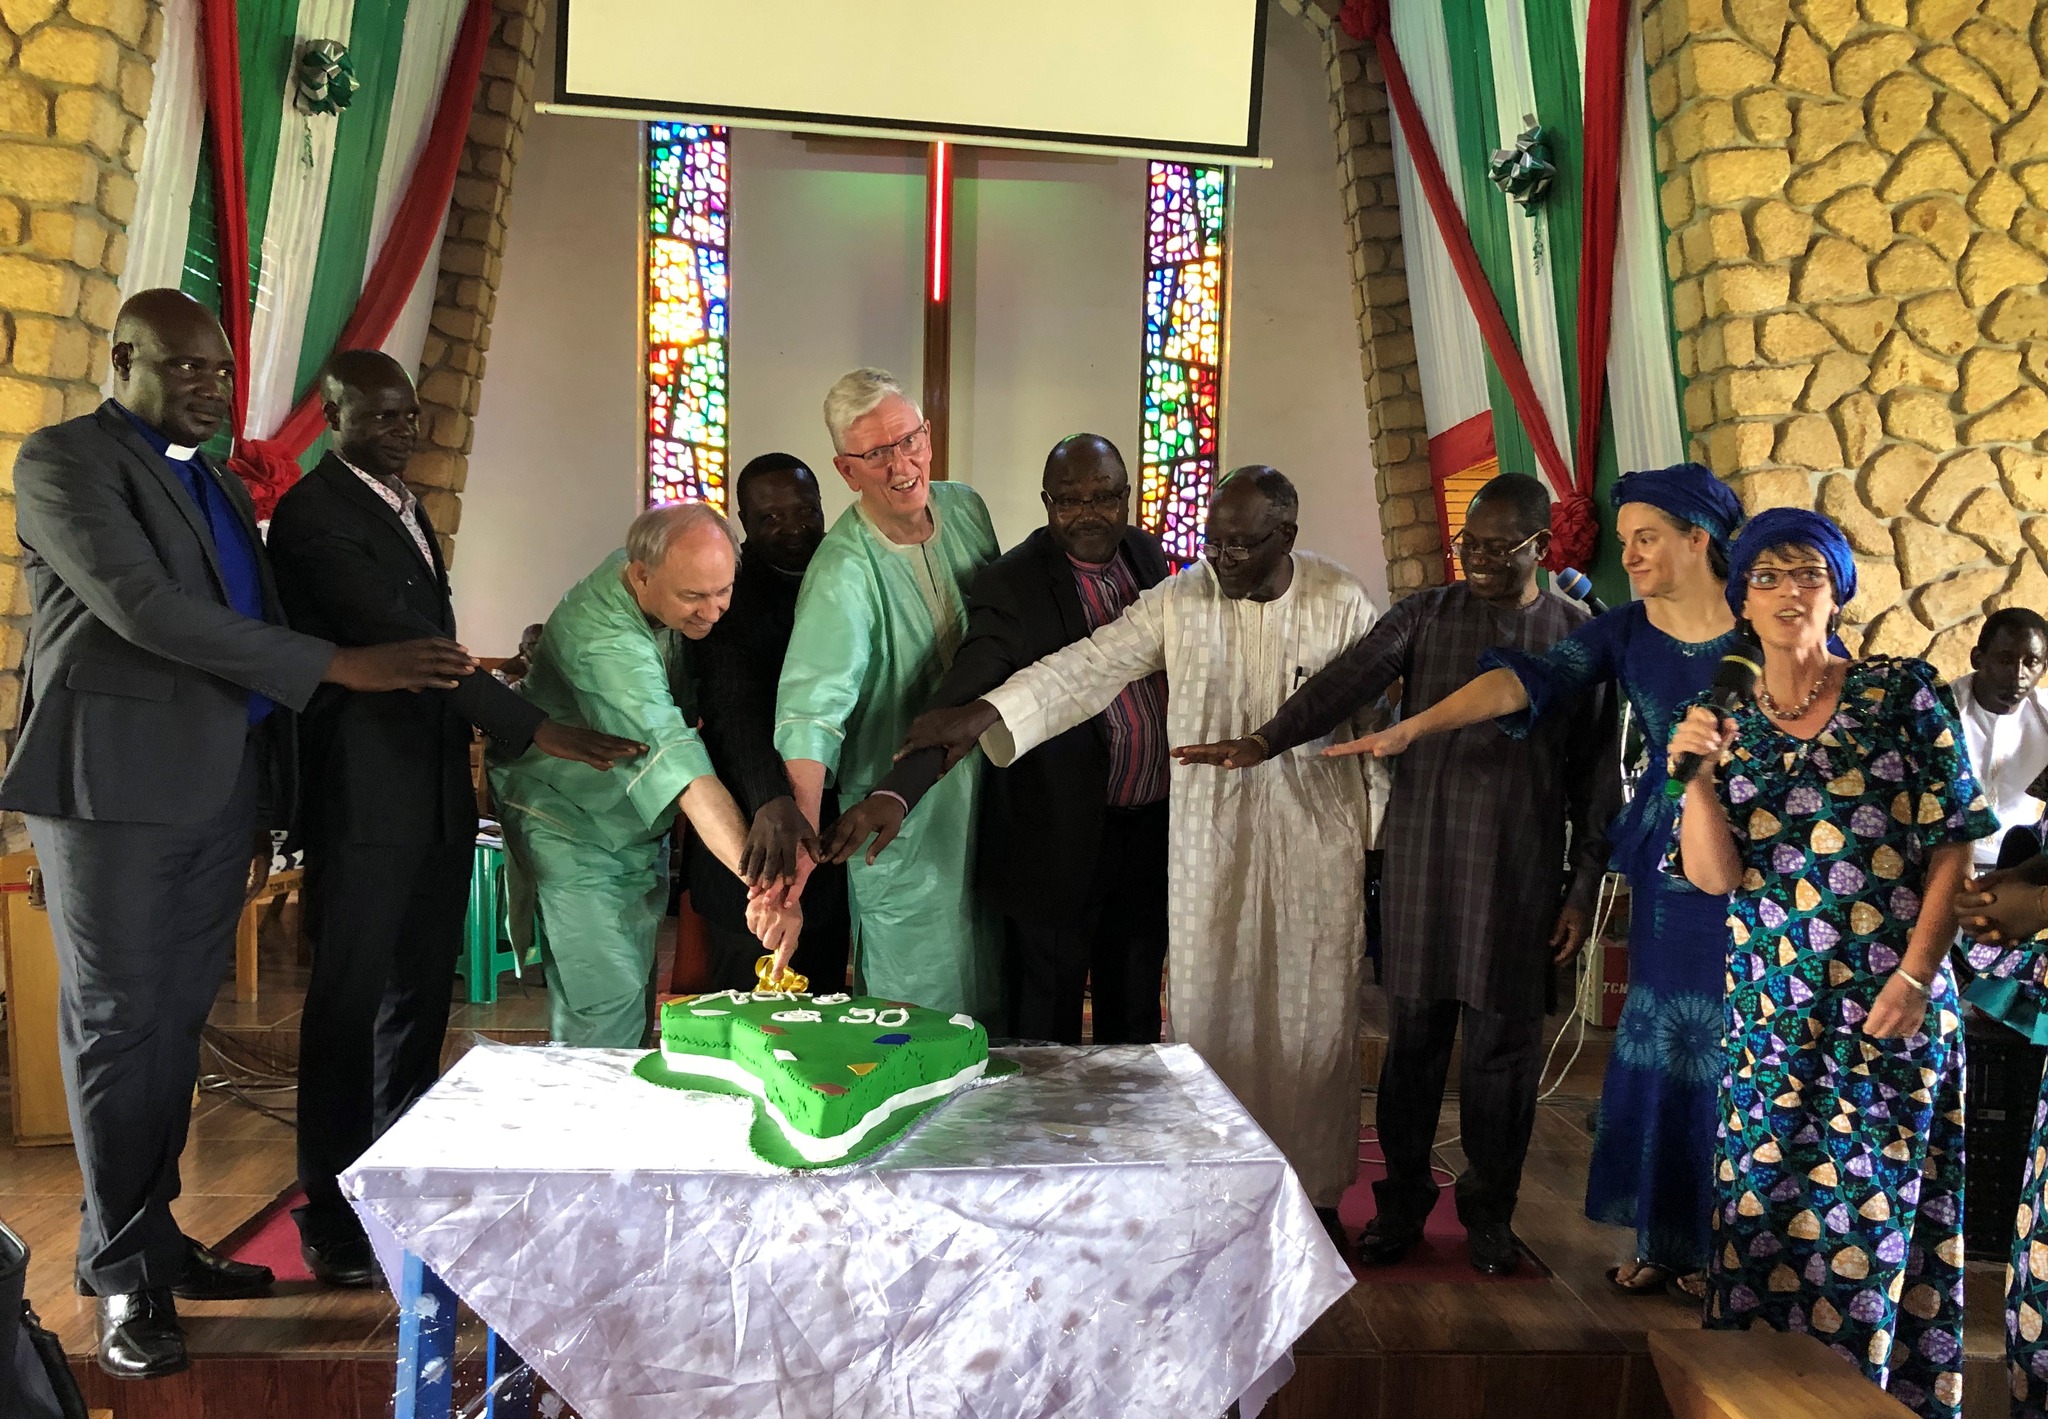 ACTS 30 Years Celebration - Cutting the cake